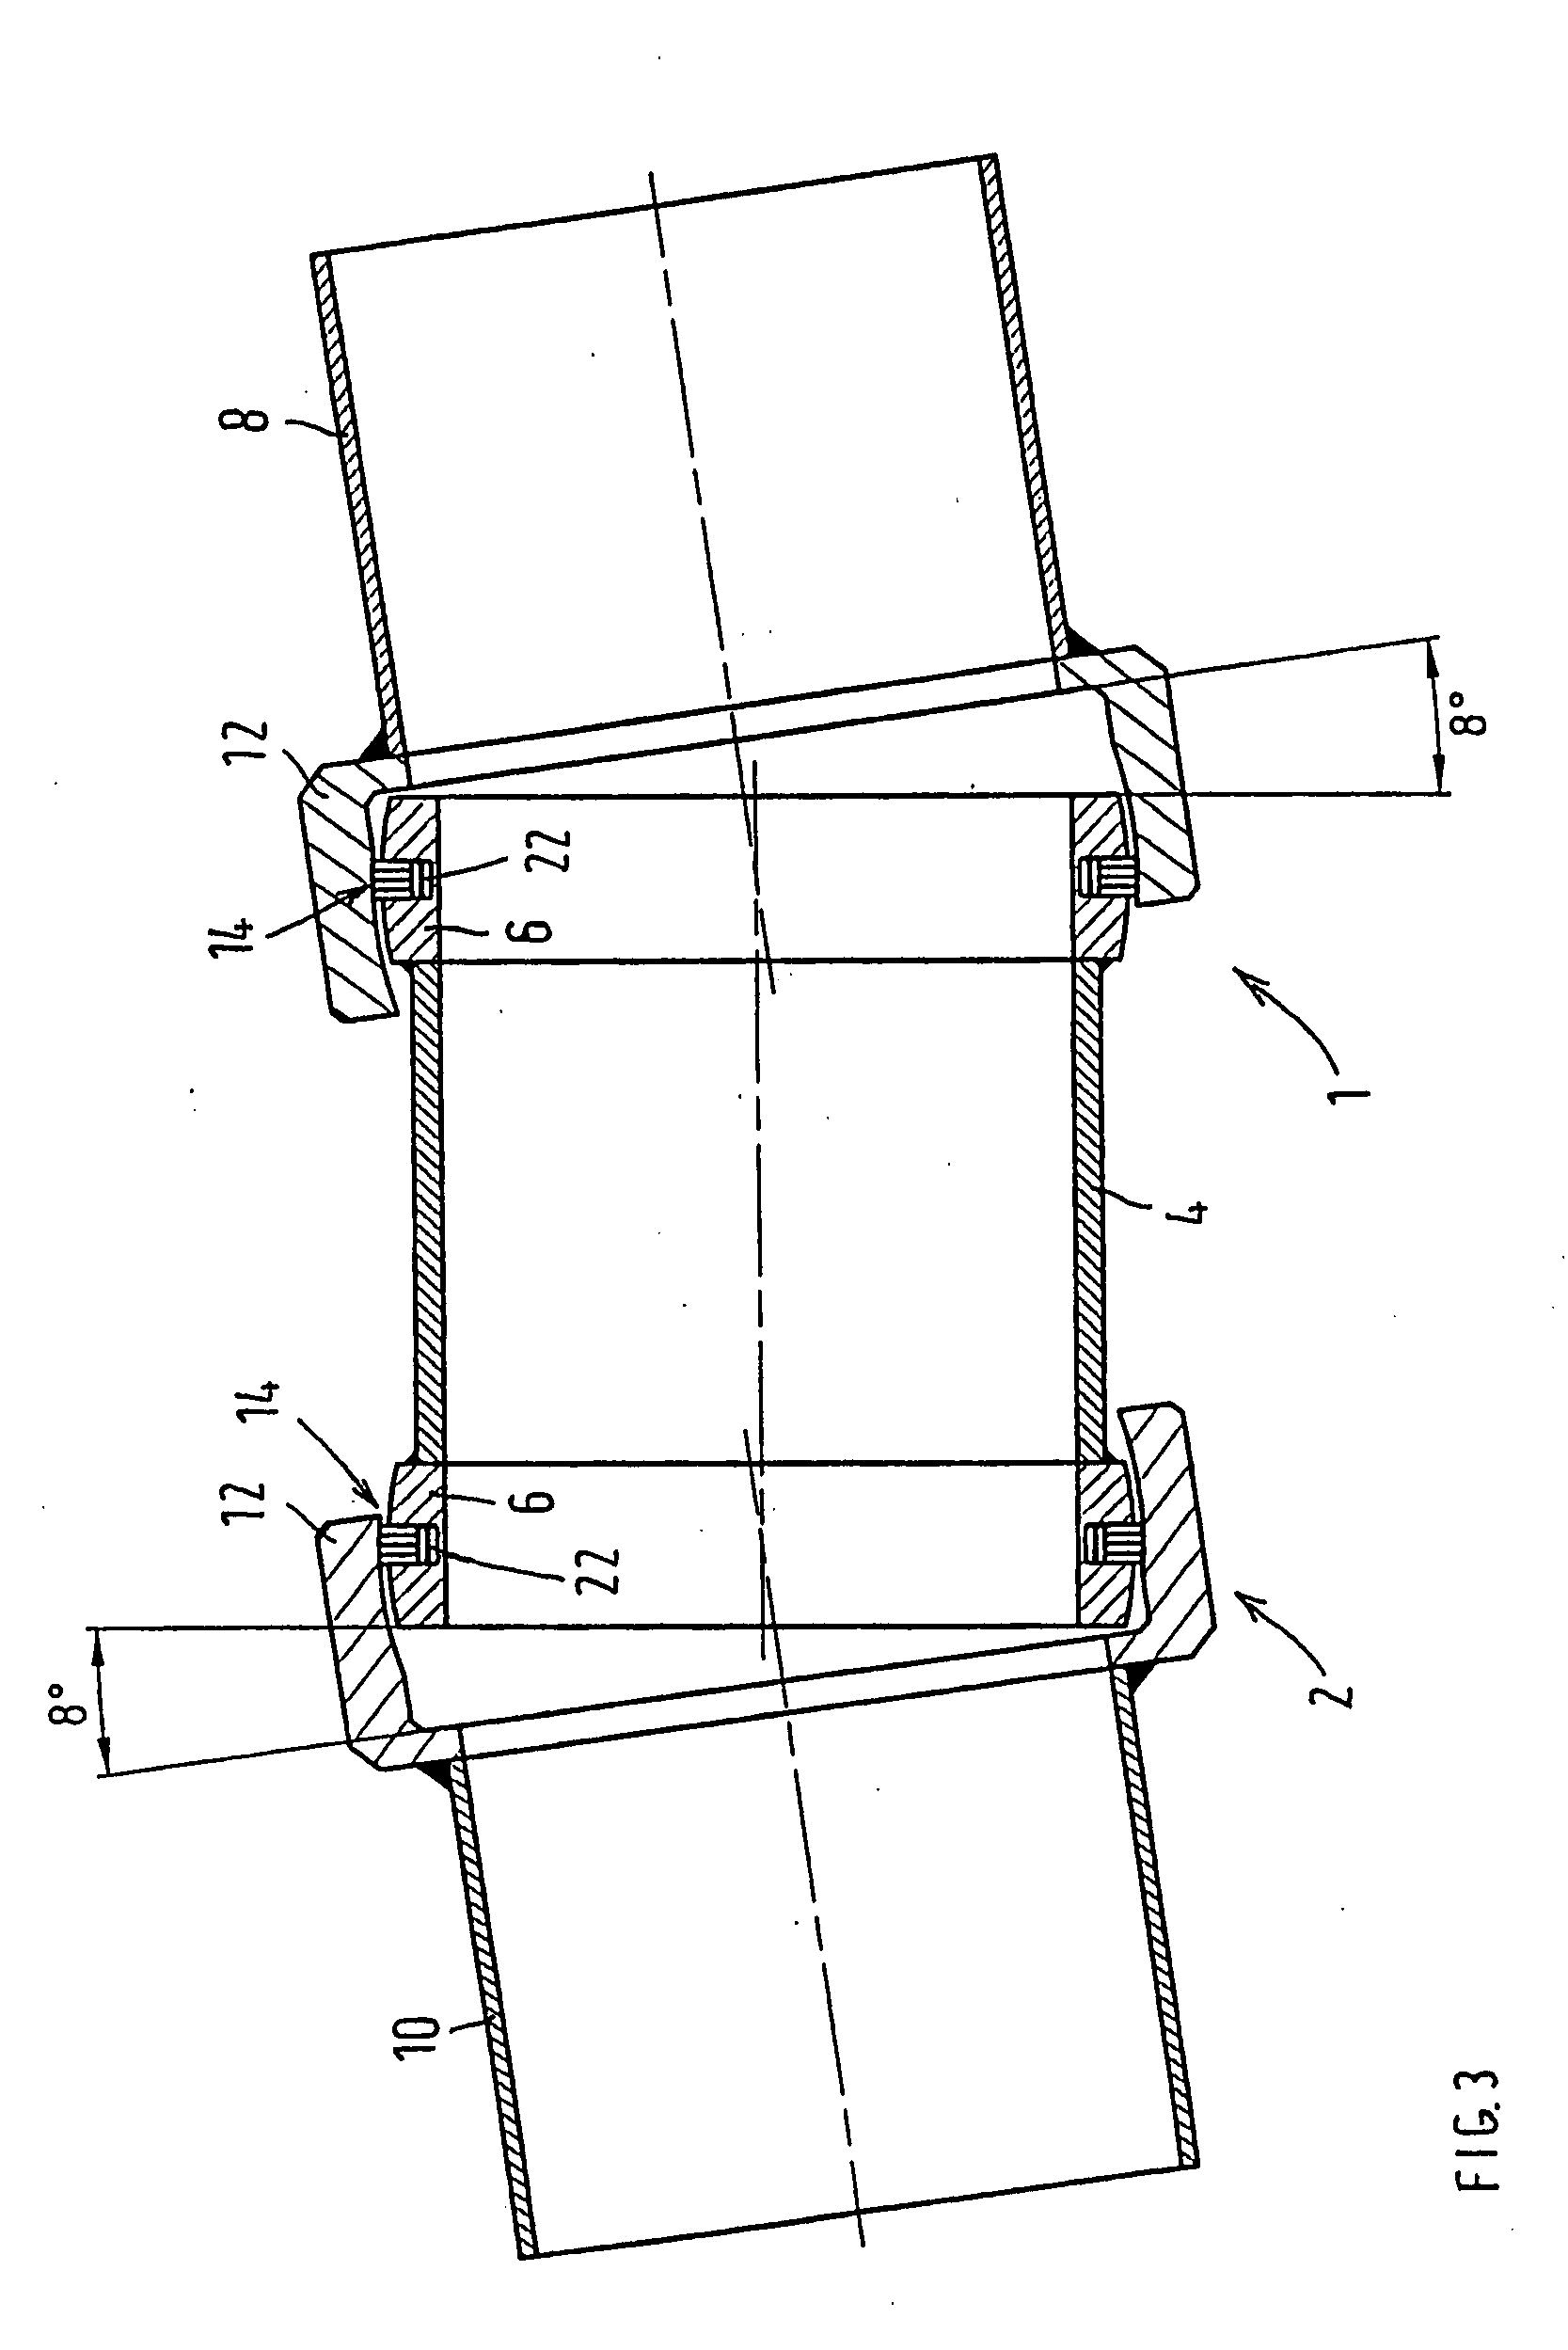 Axial and Radial Play and Angle Compensation of a Tolerating Pipe Connection